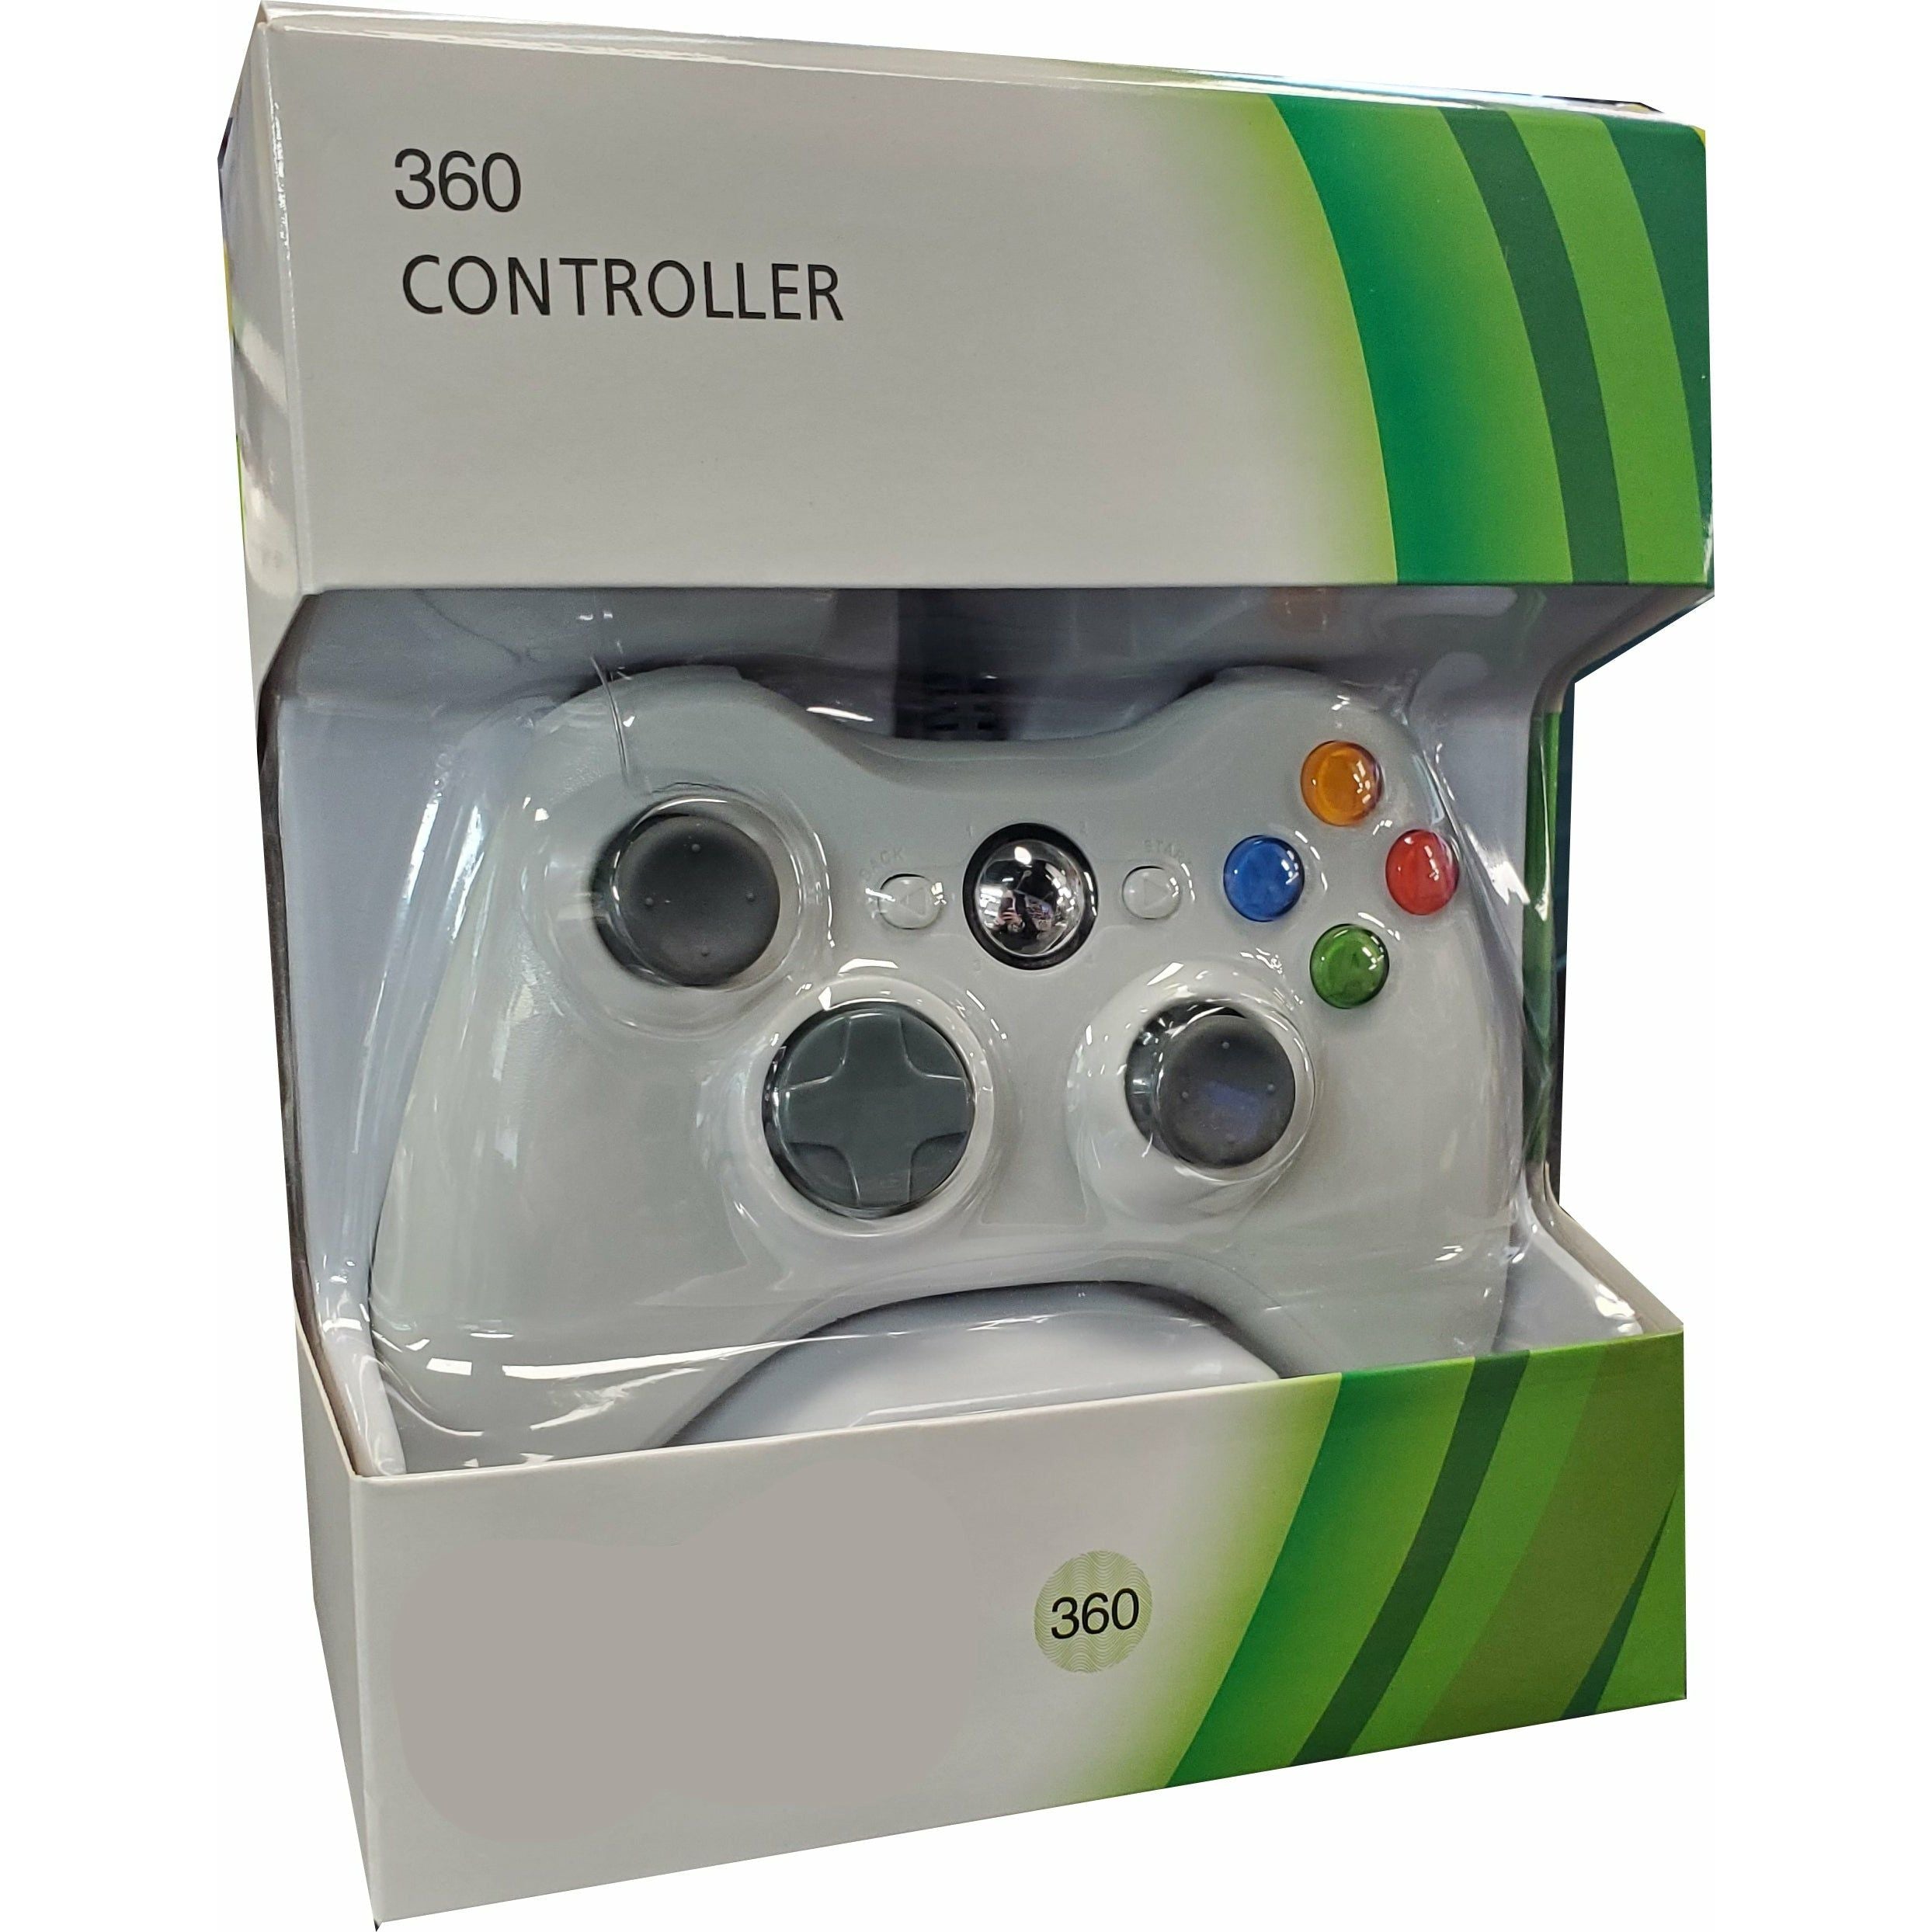 Manette filaire XBOX 360 (tiers)